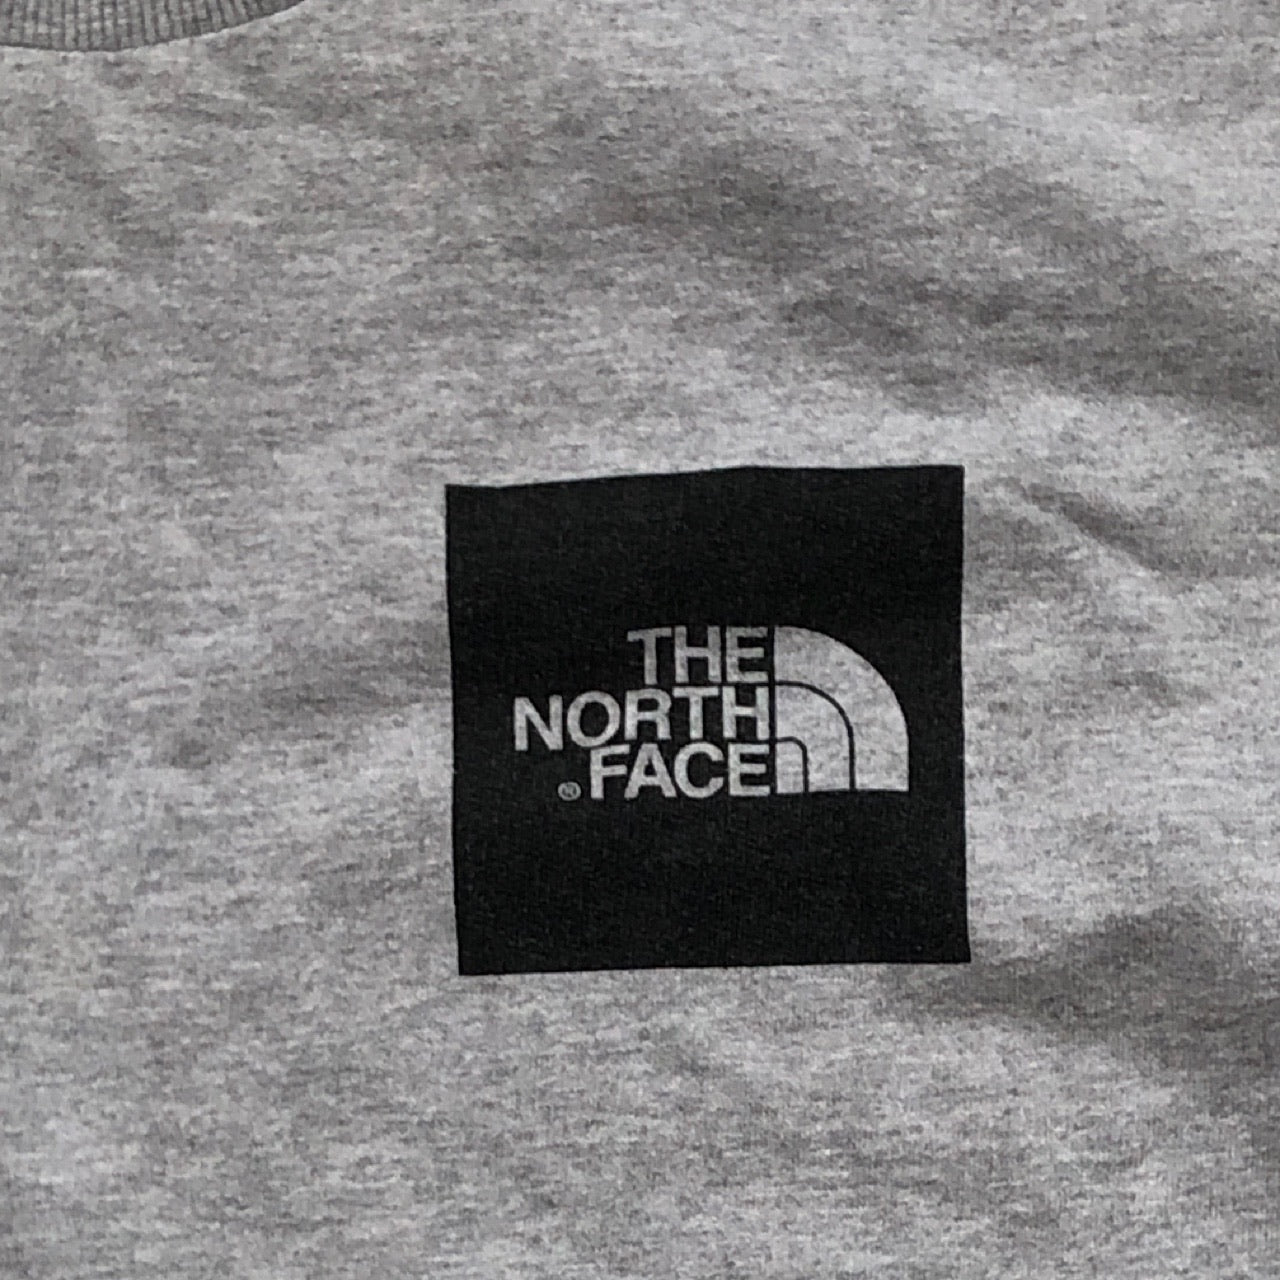 The North Face Grey Jumper (Large)